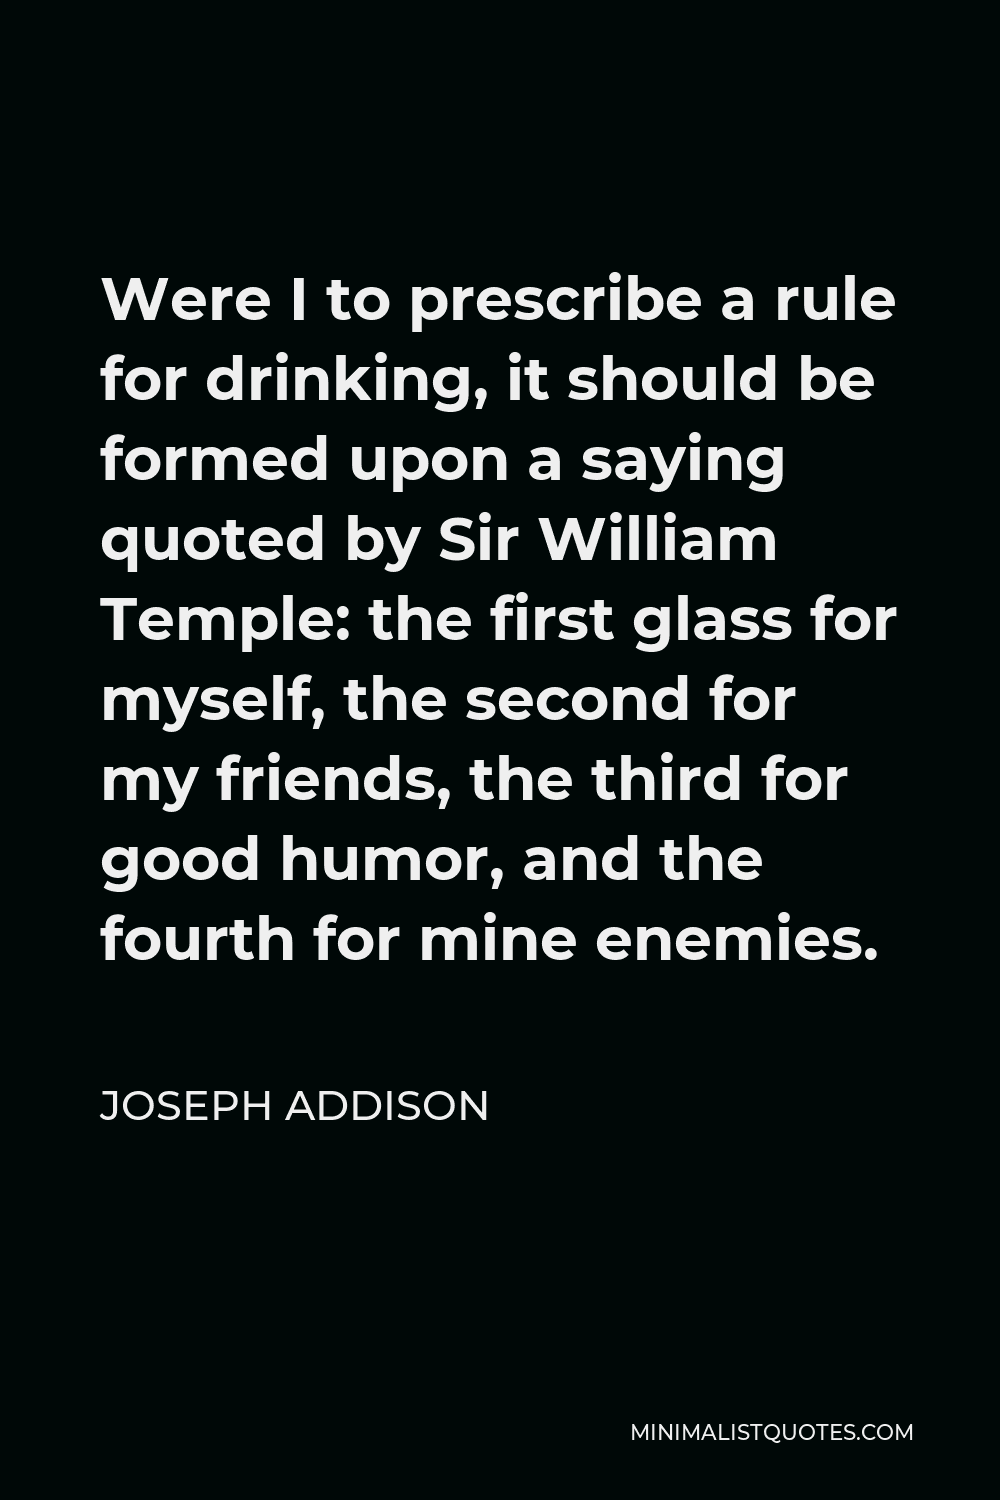 Joseph Addison Quote - Were I to prescribe a rule for drinking, it should be formed upon a saying quoted by Sir William Temple: the first glass for myself, the second for my friends, the third for good humor, and the fourth for mine enemies.